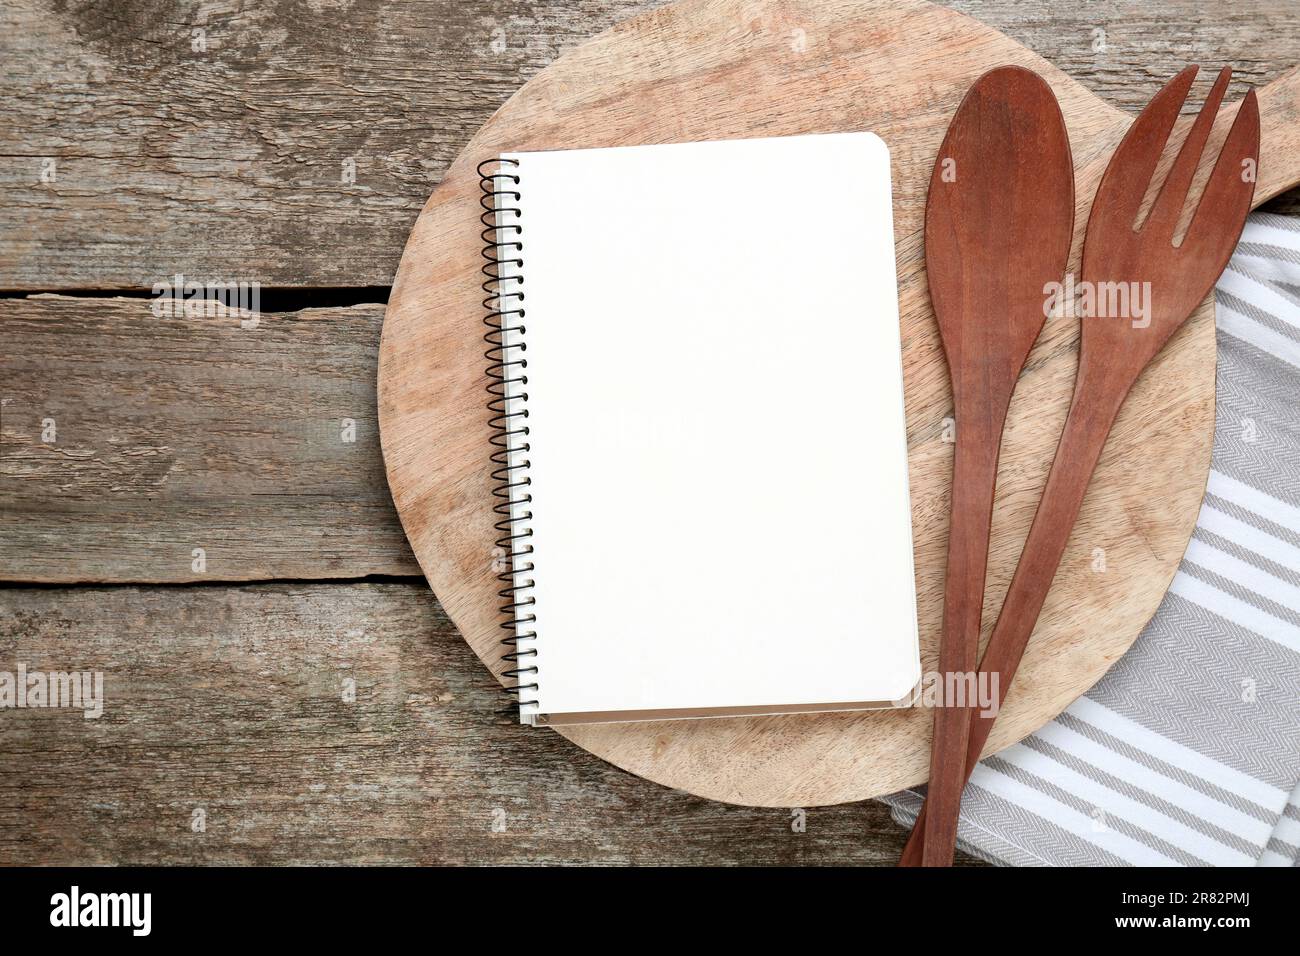 https://c8.alamy.com/comp/2R82PMJ/blank-recipe-book-and-kitchen-utensils-on-old-wooden-table-flat-lay-space-for-text-2R82PMJ.jpg